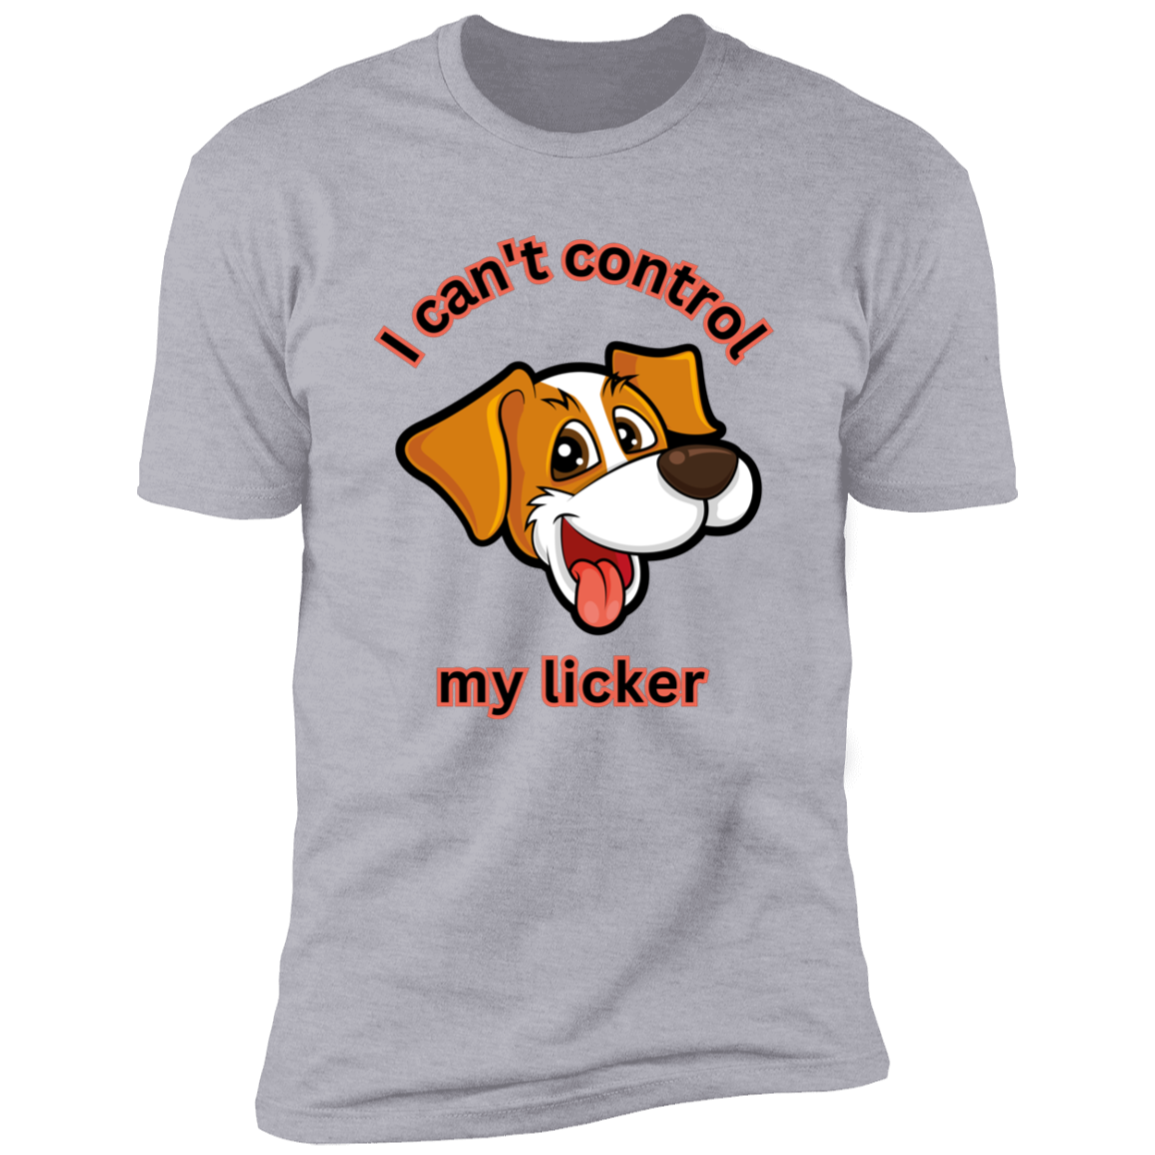 I Can't Control My Licker